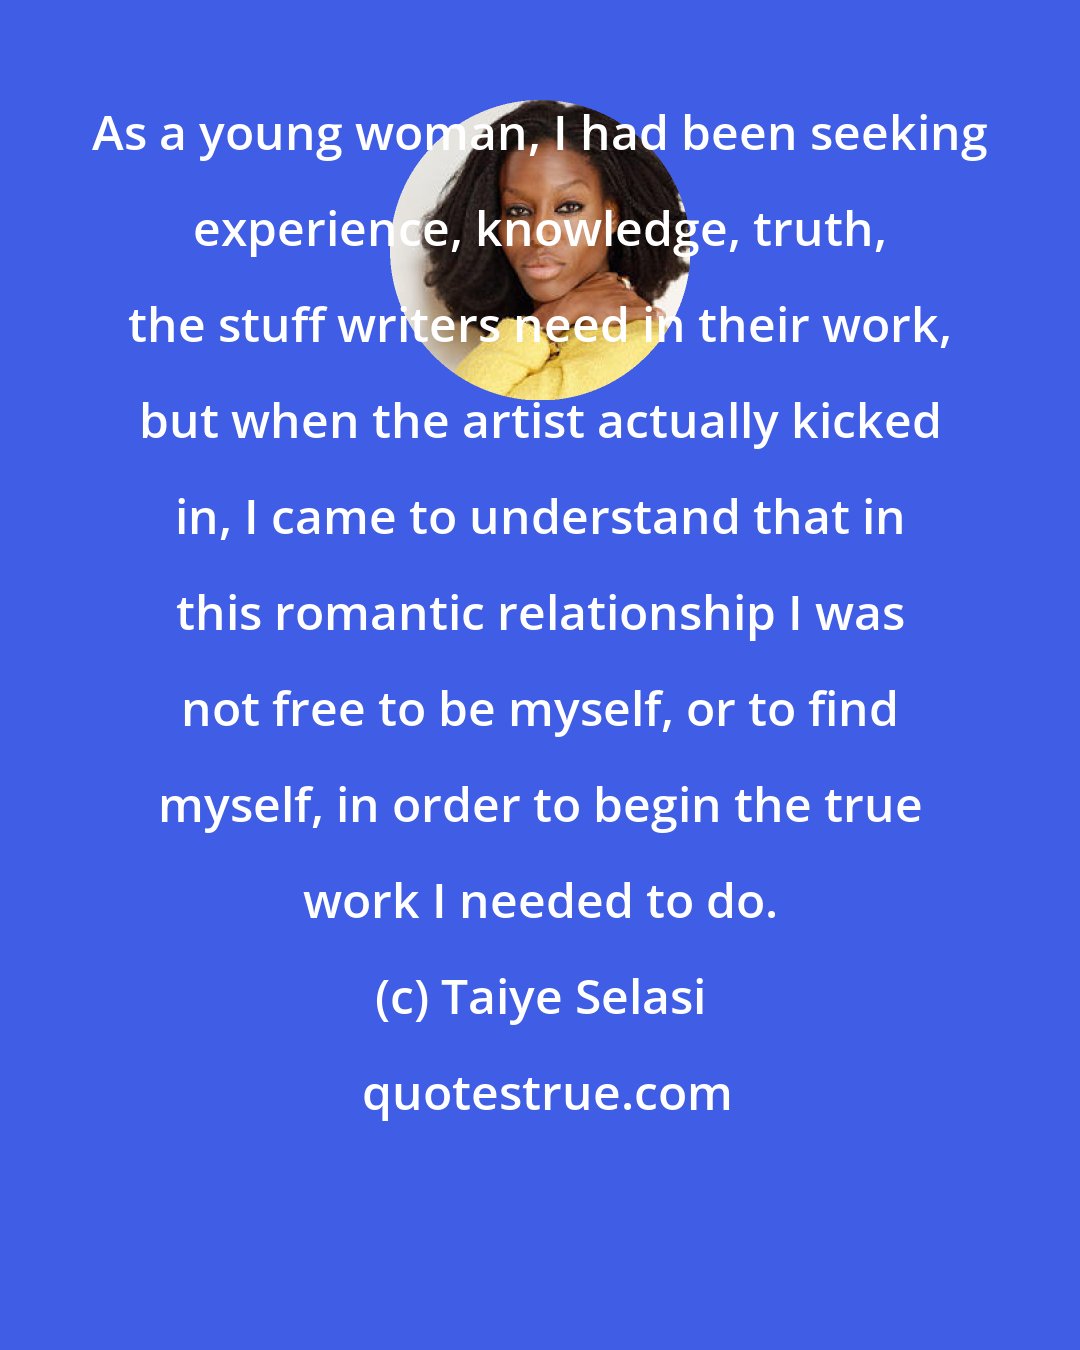 Taiye Selasi: As a young woman, I had been seeking experience, knowledge, truth, the stuff writers need in their work, but when the artist actually kicked in, I came to understand that in this romantic relationship I was not free to be myself, or to find myself, in order to begin the true work I needed to do.